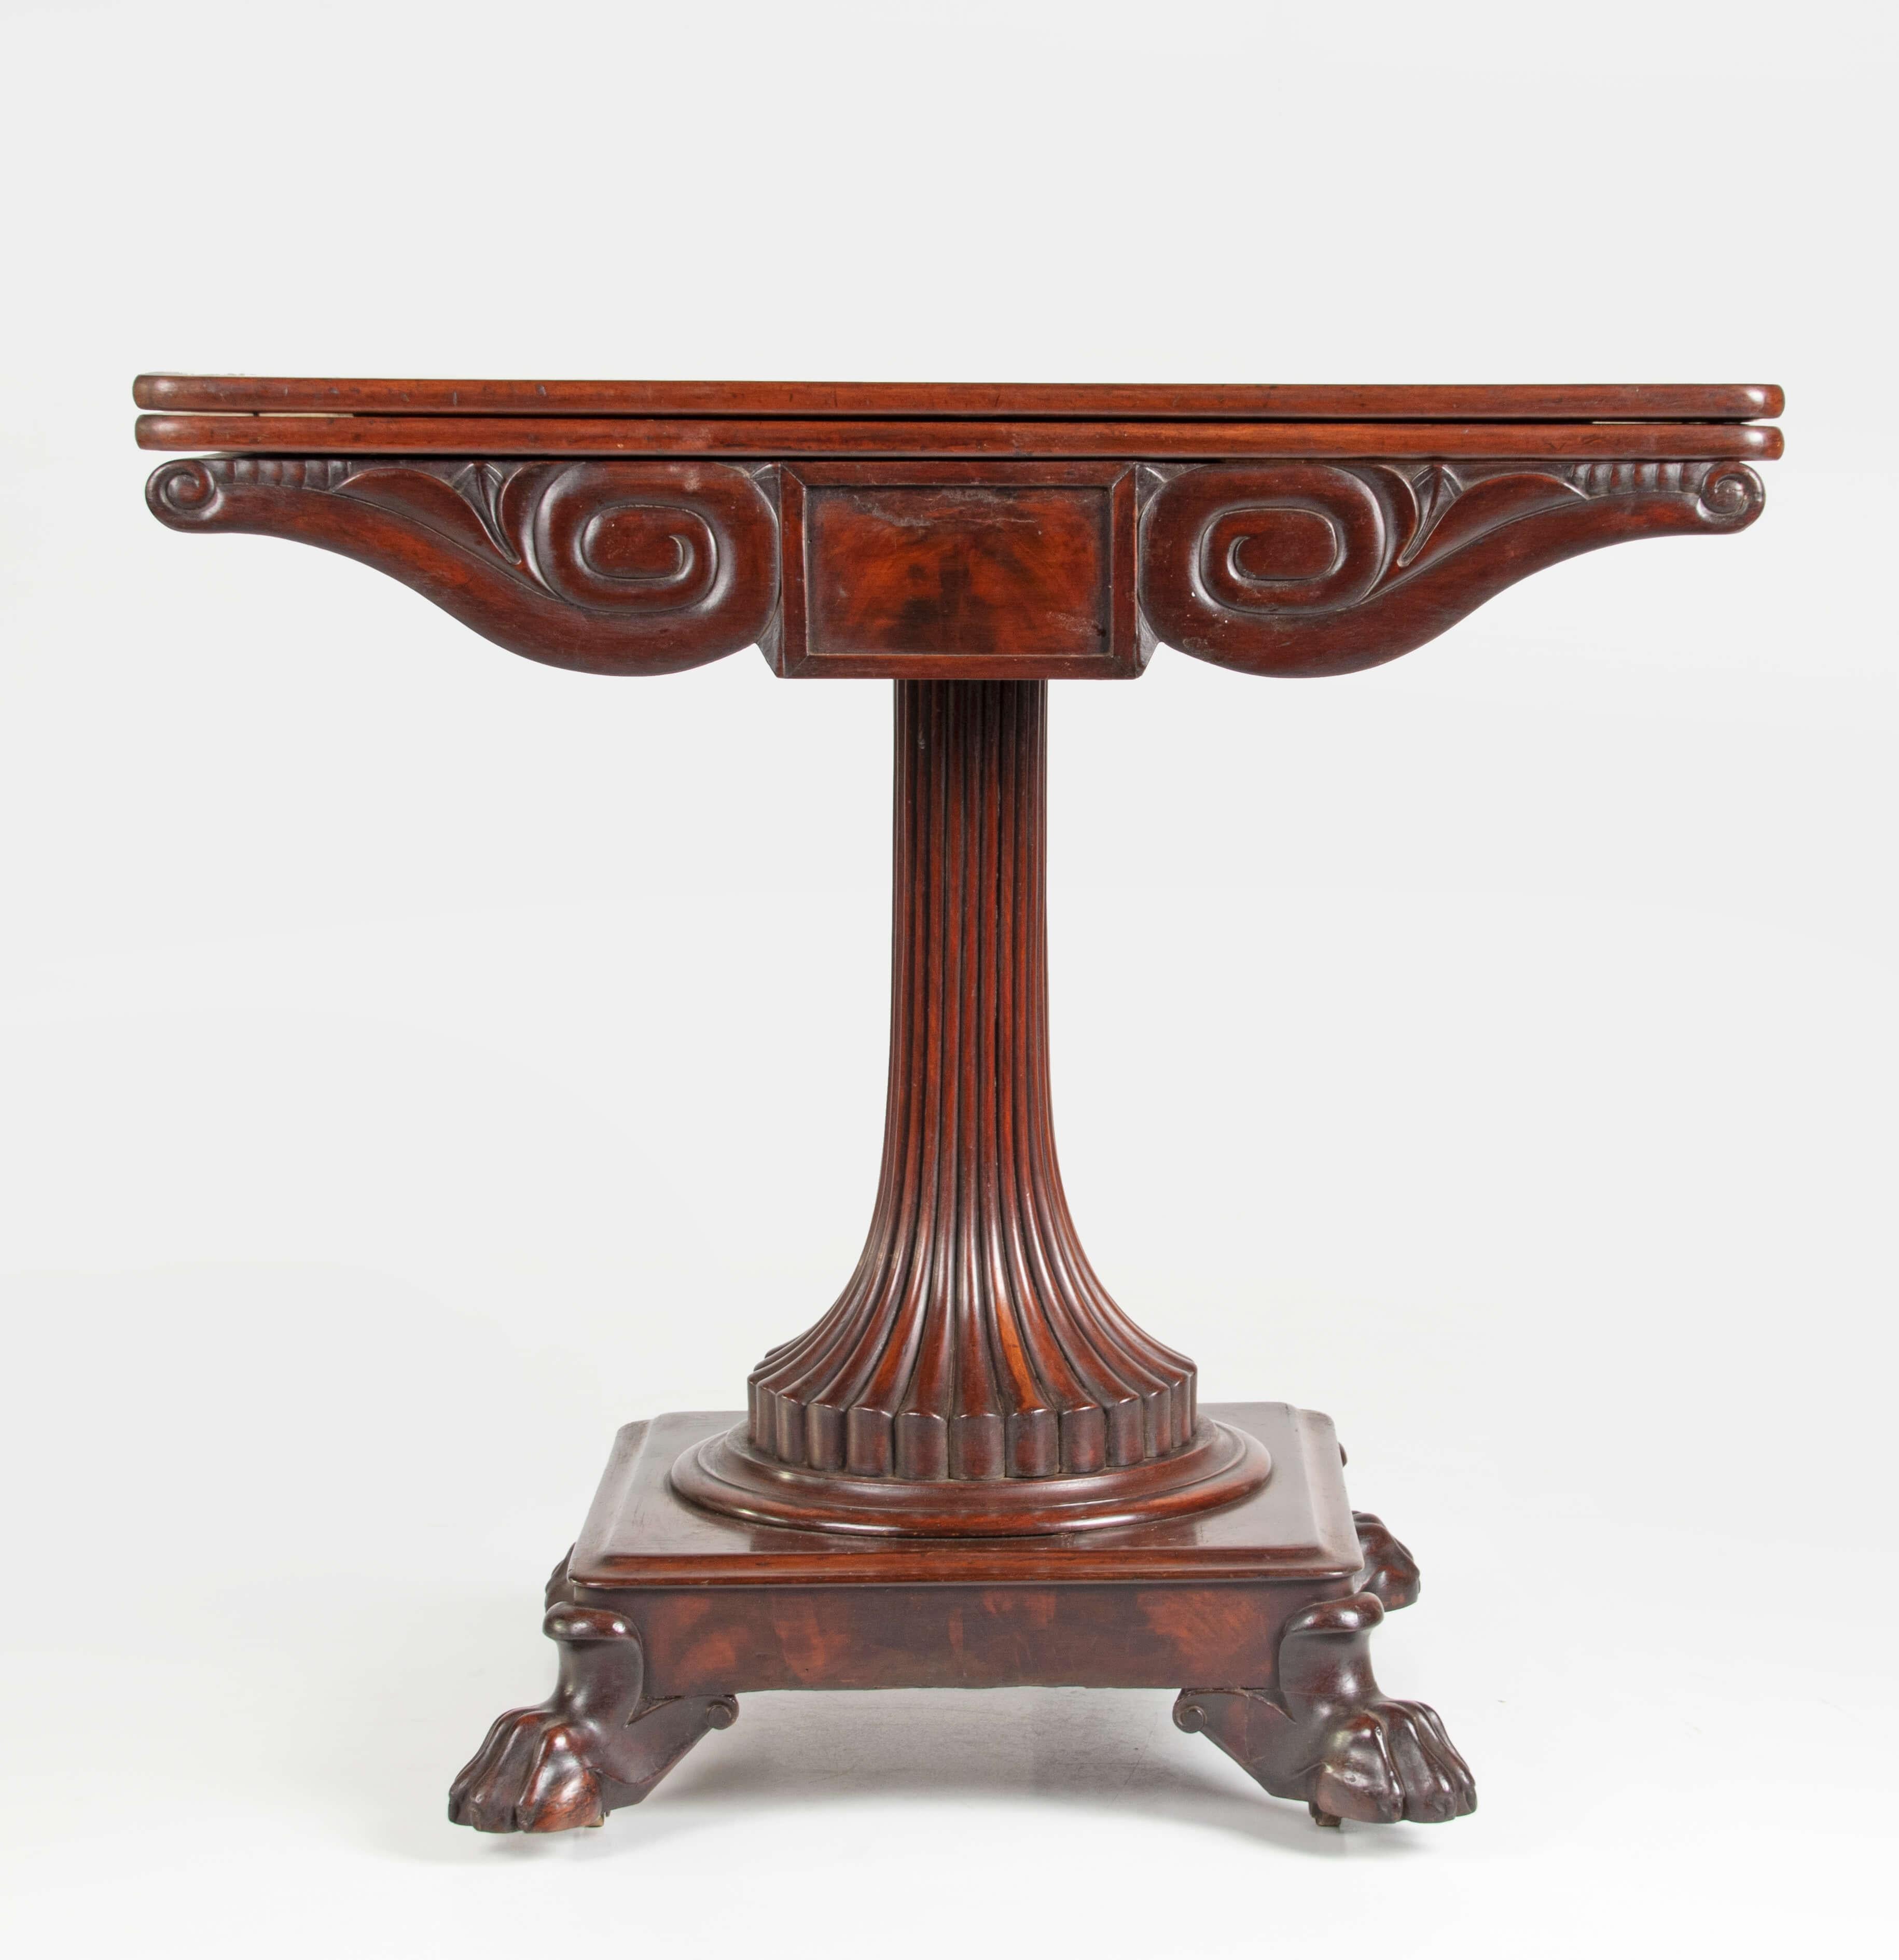 Beautiful English side table. Made of mahogany, partly veneered and partly solid. The tabletop can be folded out and turned a quarter turn, it is then a game table.

This table is in good condition. The table is sturdy and is structurally sound.